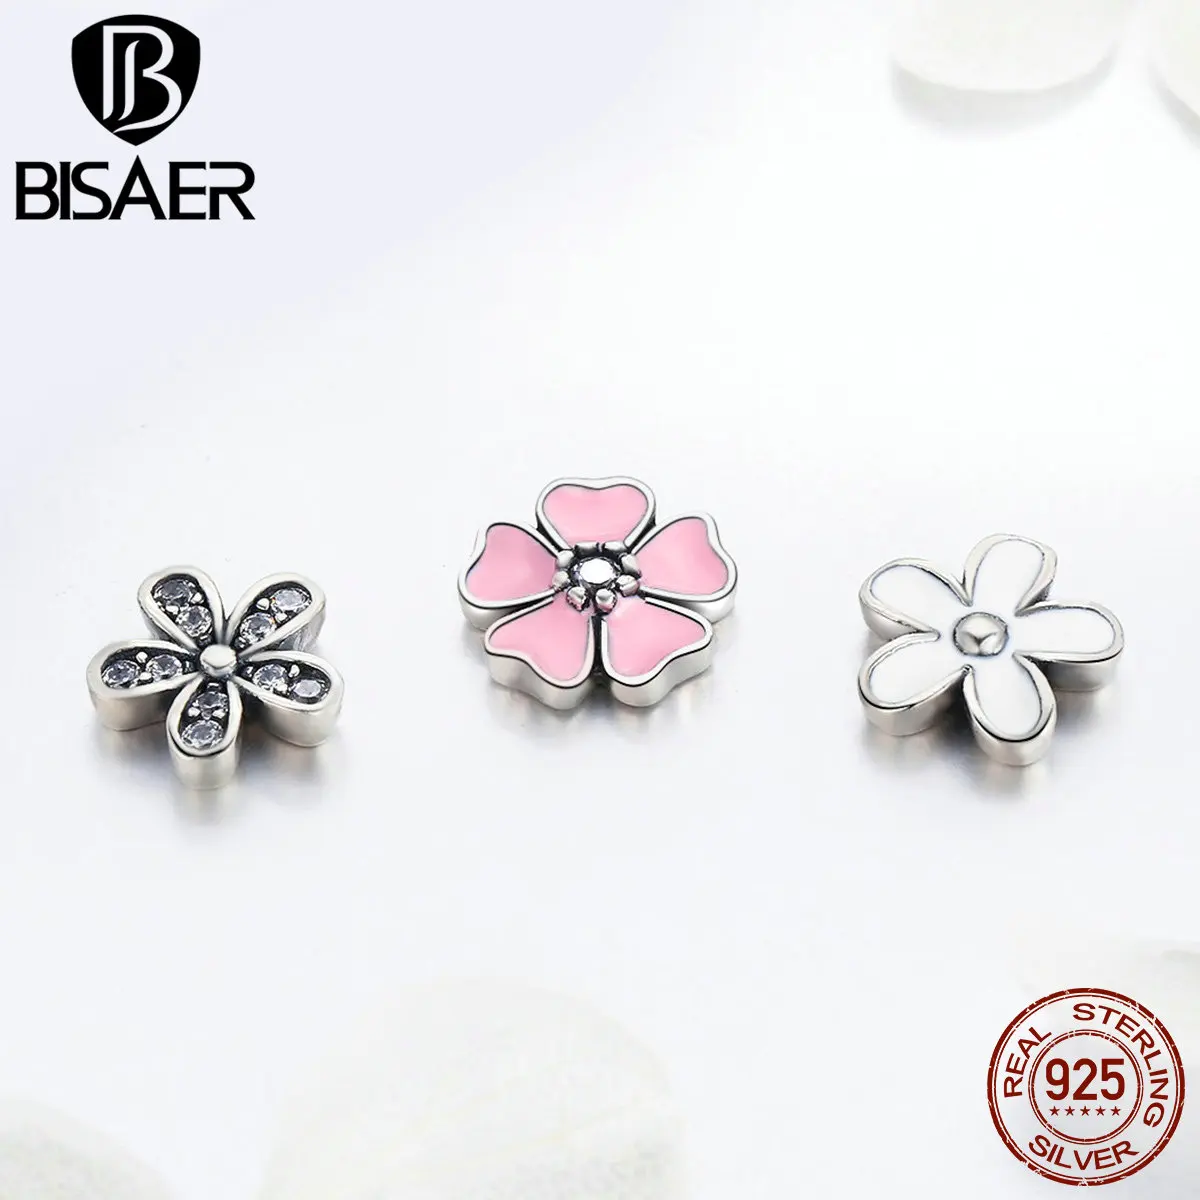 

High Quality 925 Sterling Silver Pink Flower Poetic Daisy Cherry Blossom Mixed Enamel Locket Pendant Necklaces Petite Memories